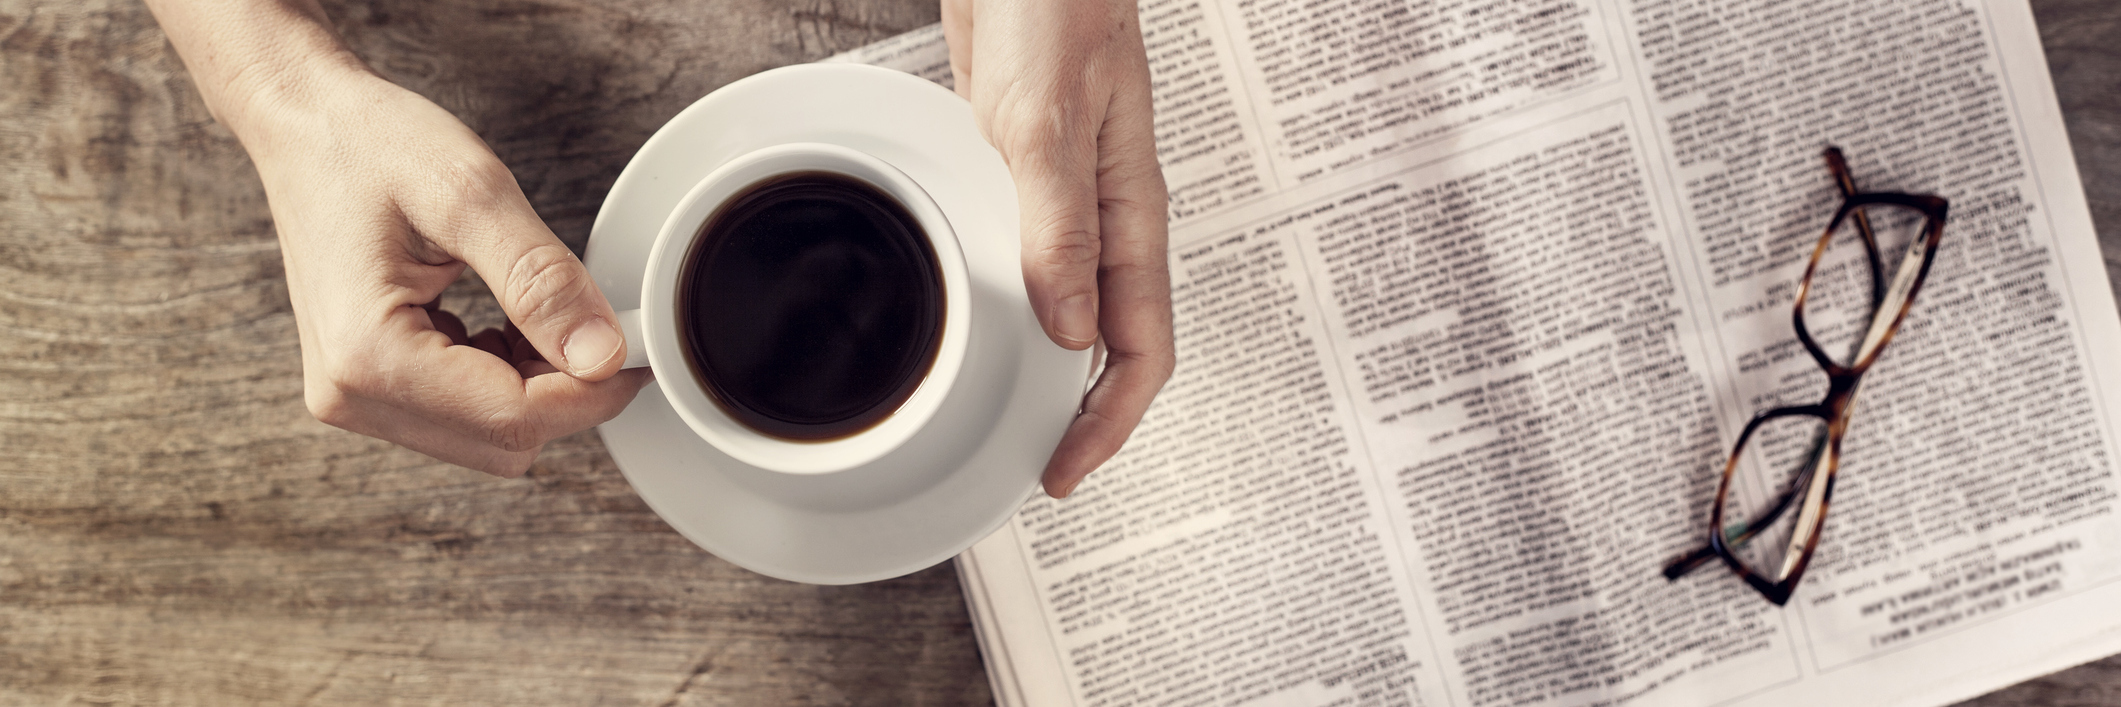 Young woman reading newspaper and holding coffee cup